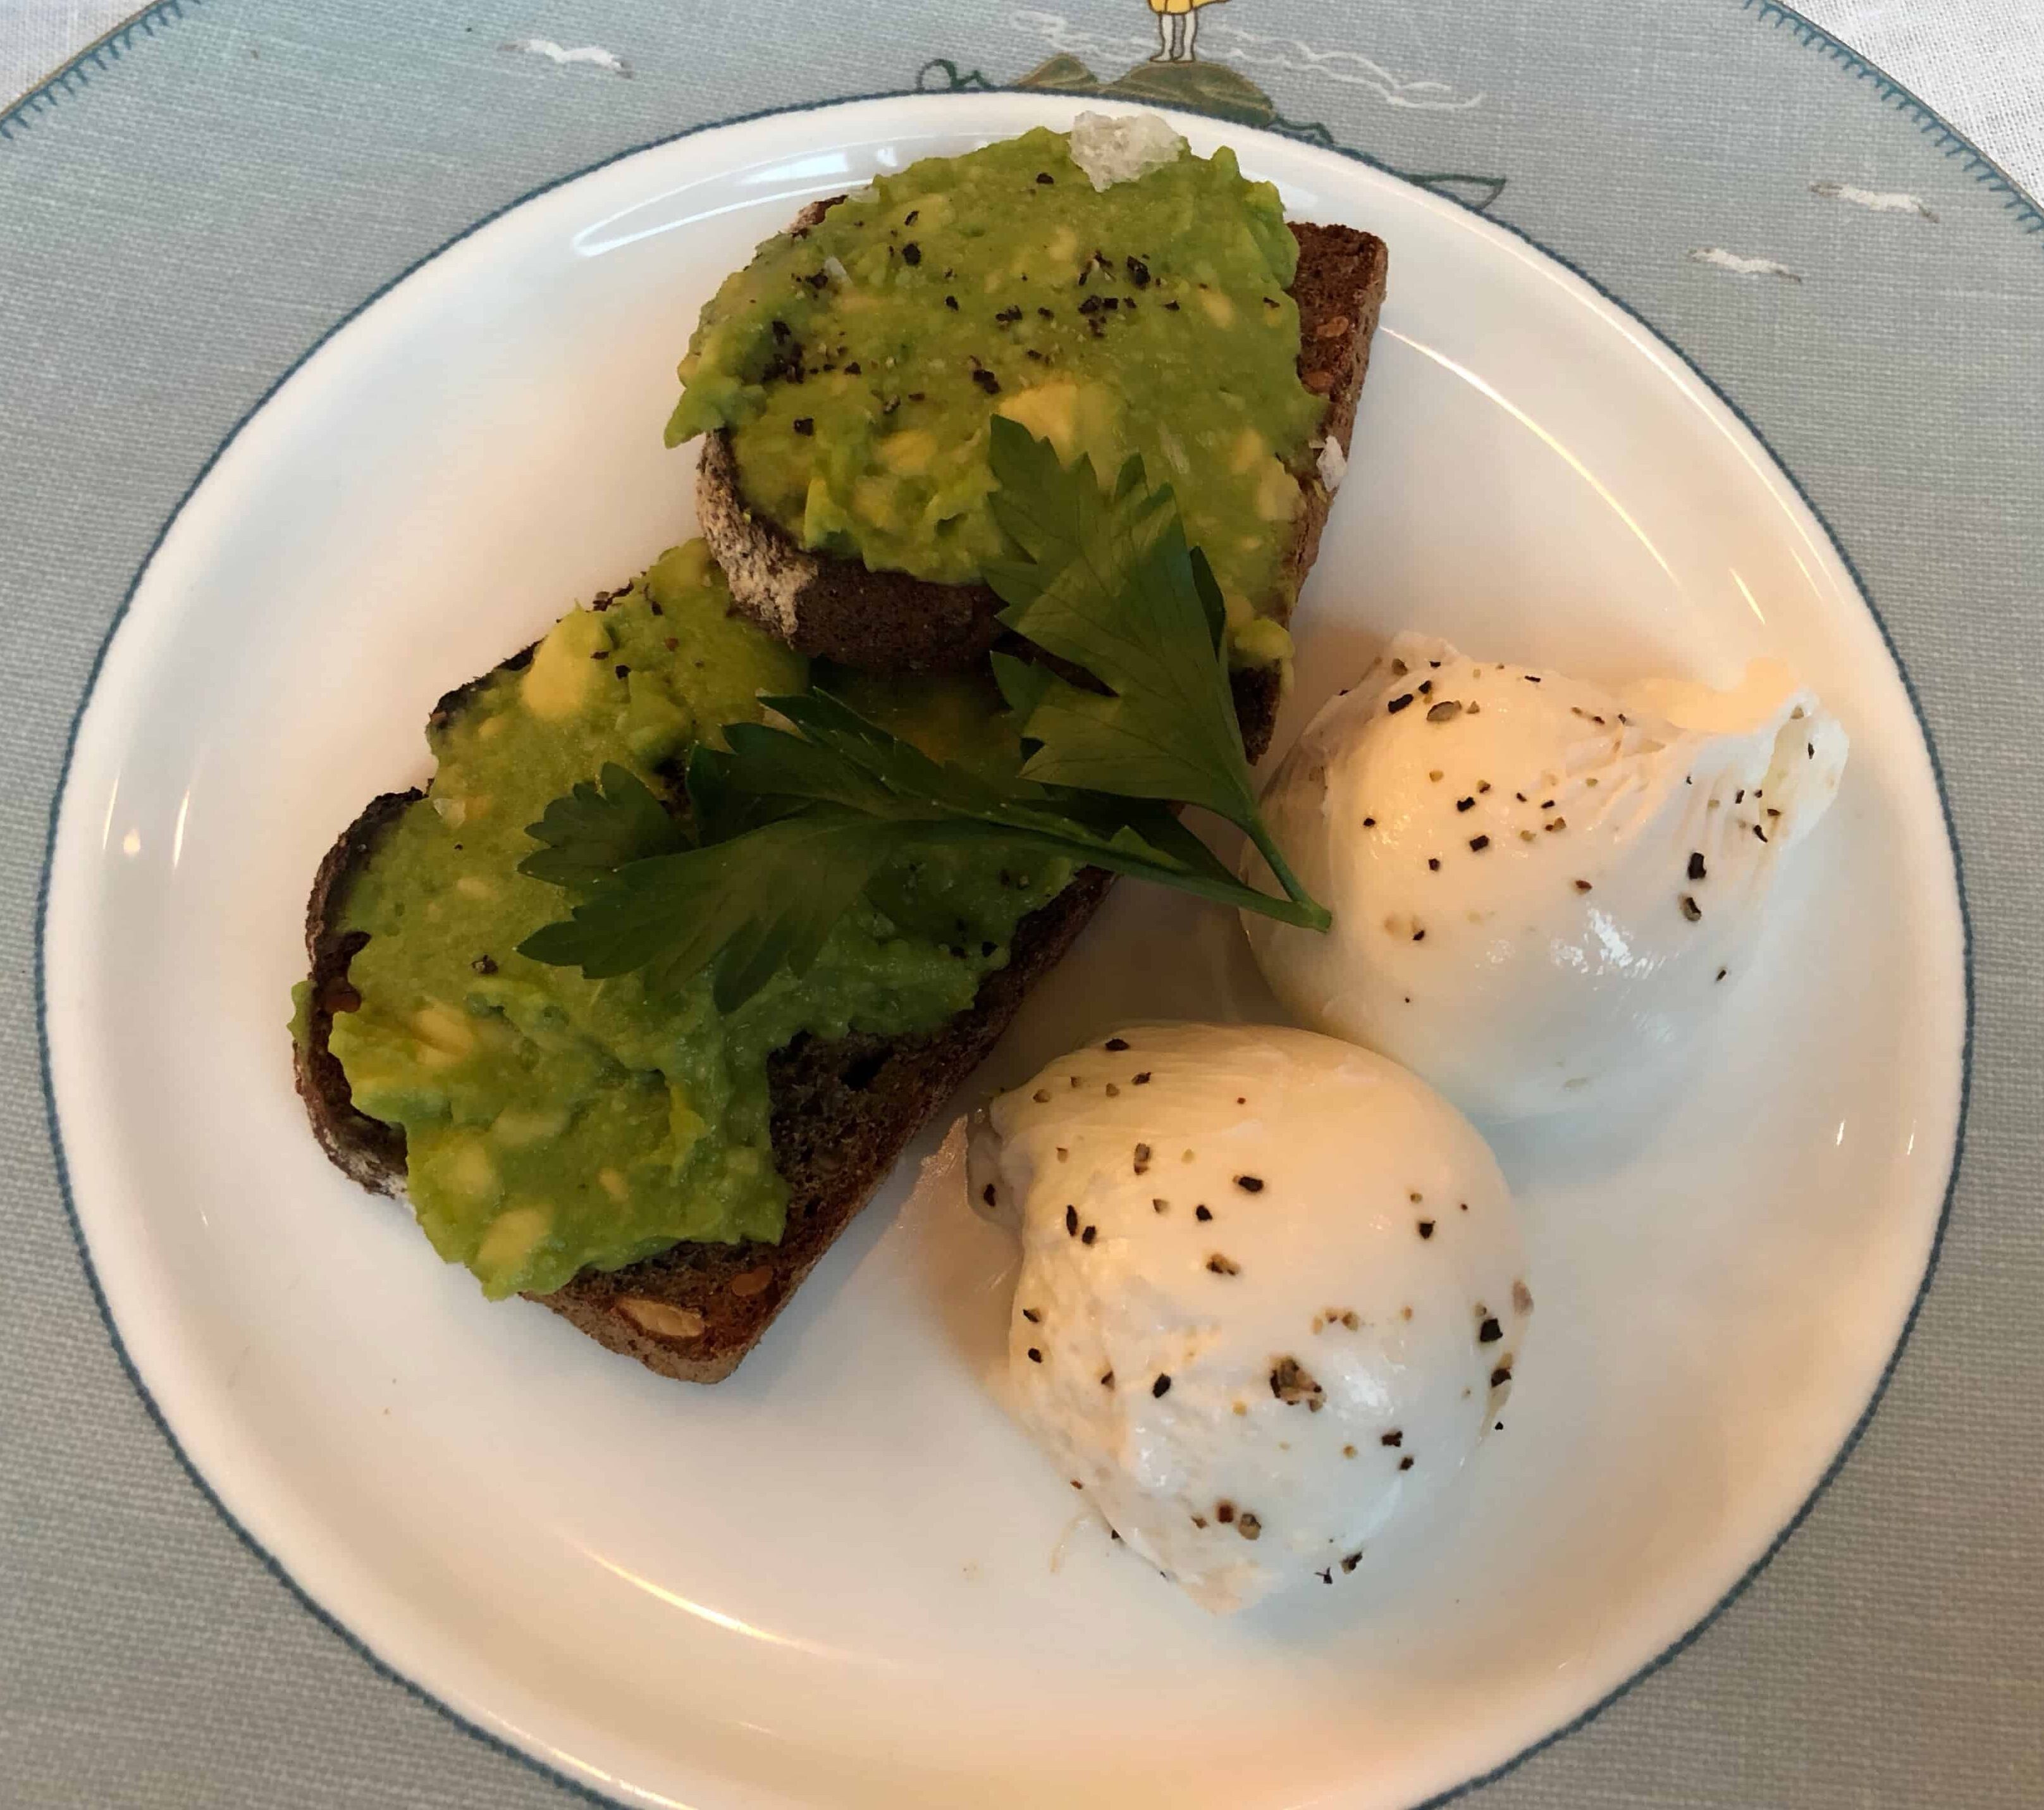 Poached eggs with avocado toast at Ham Yard Bar & Restaurant in London, England